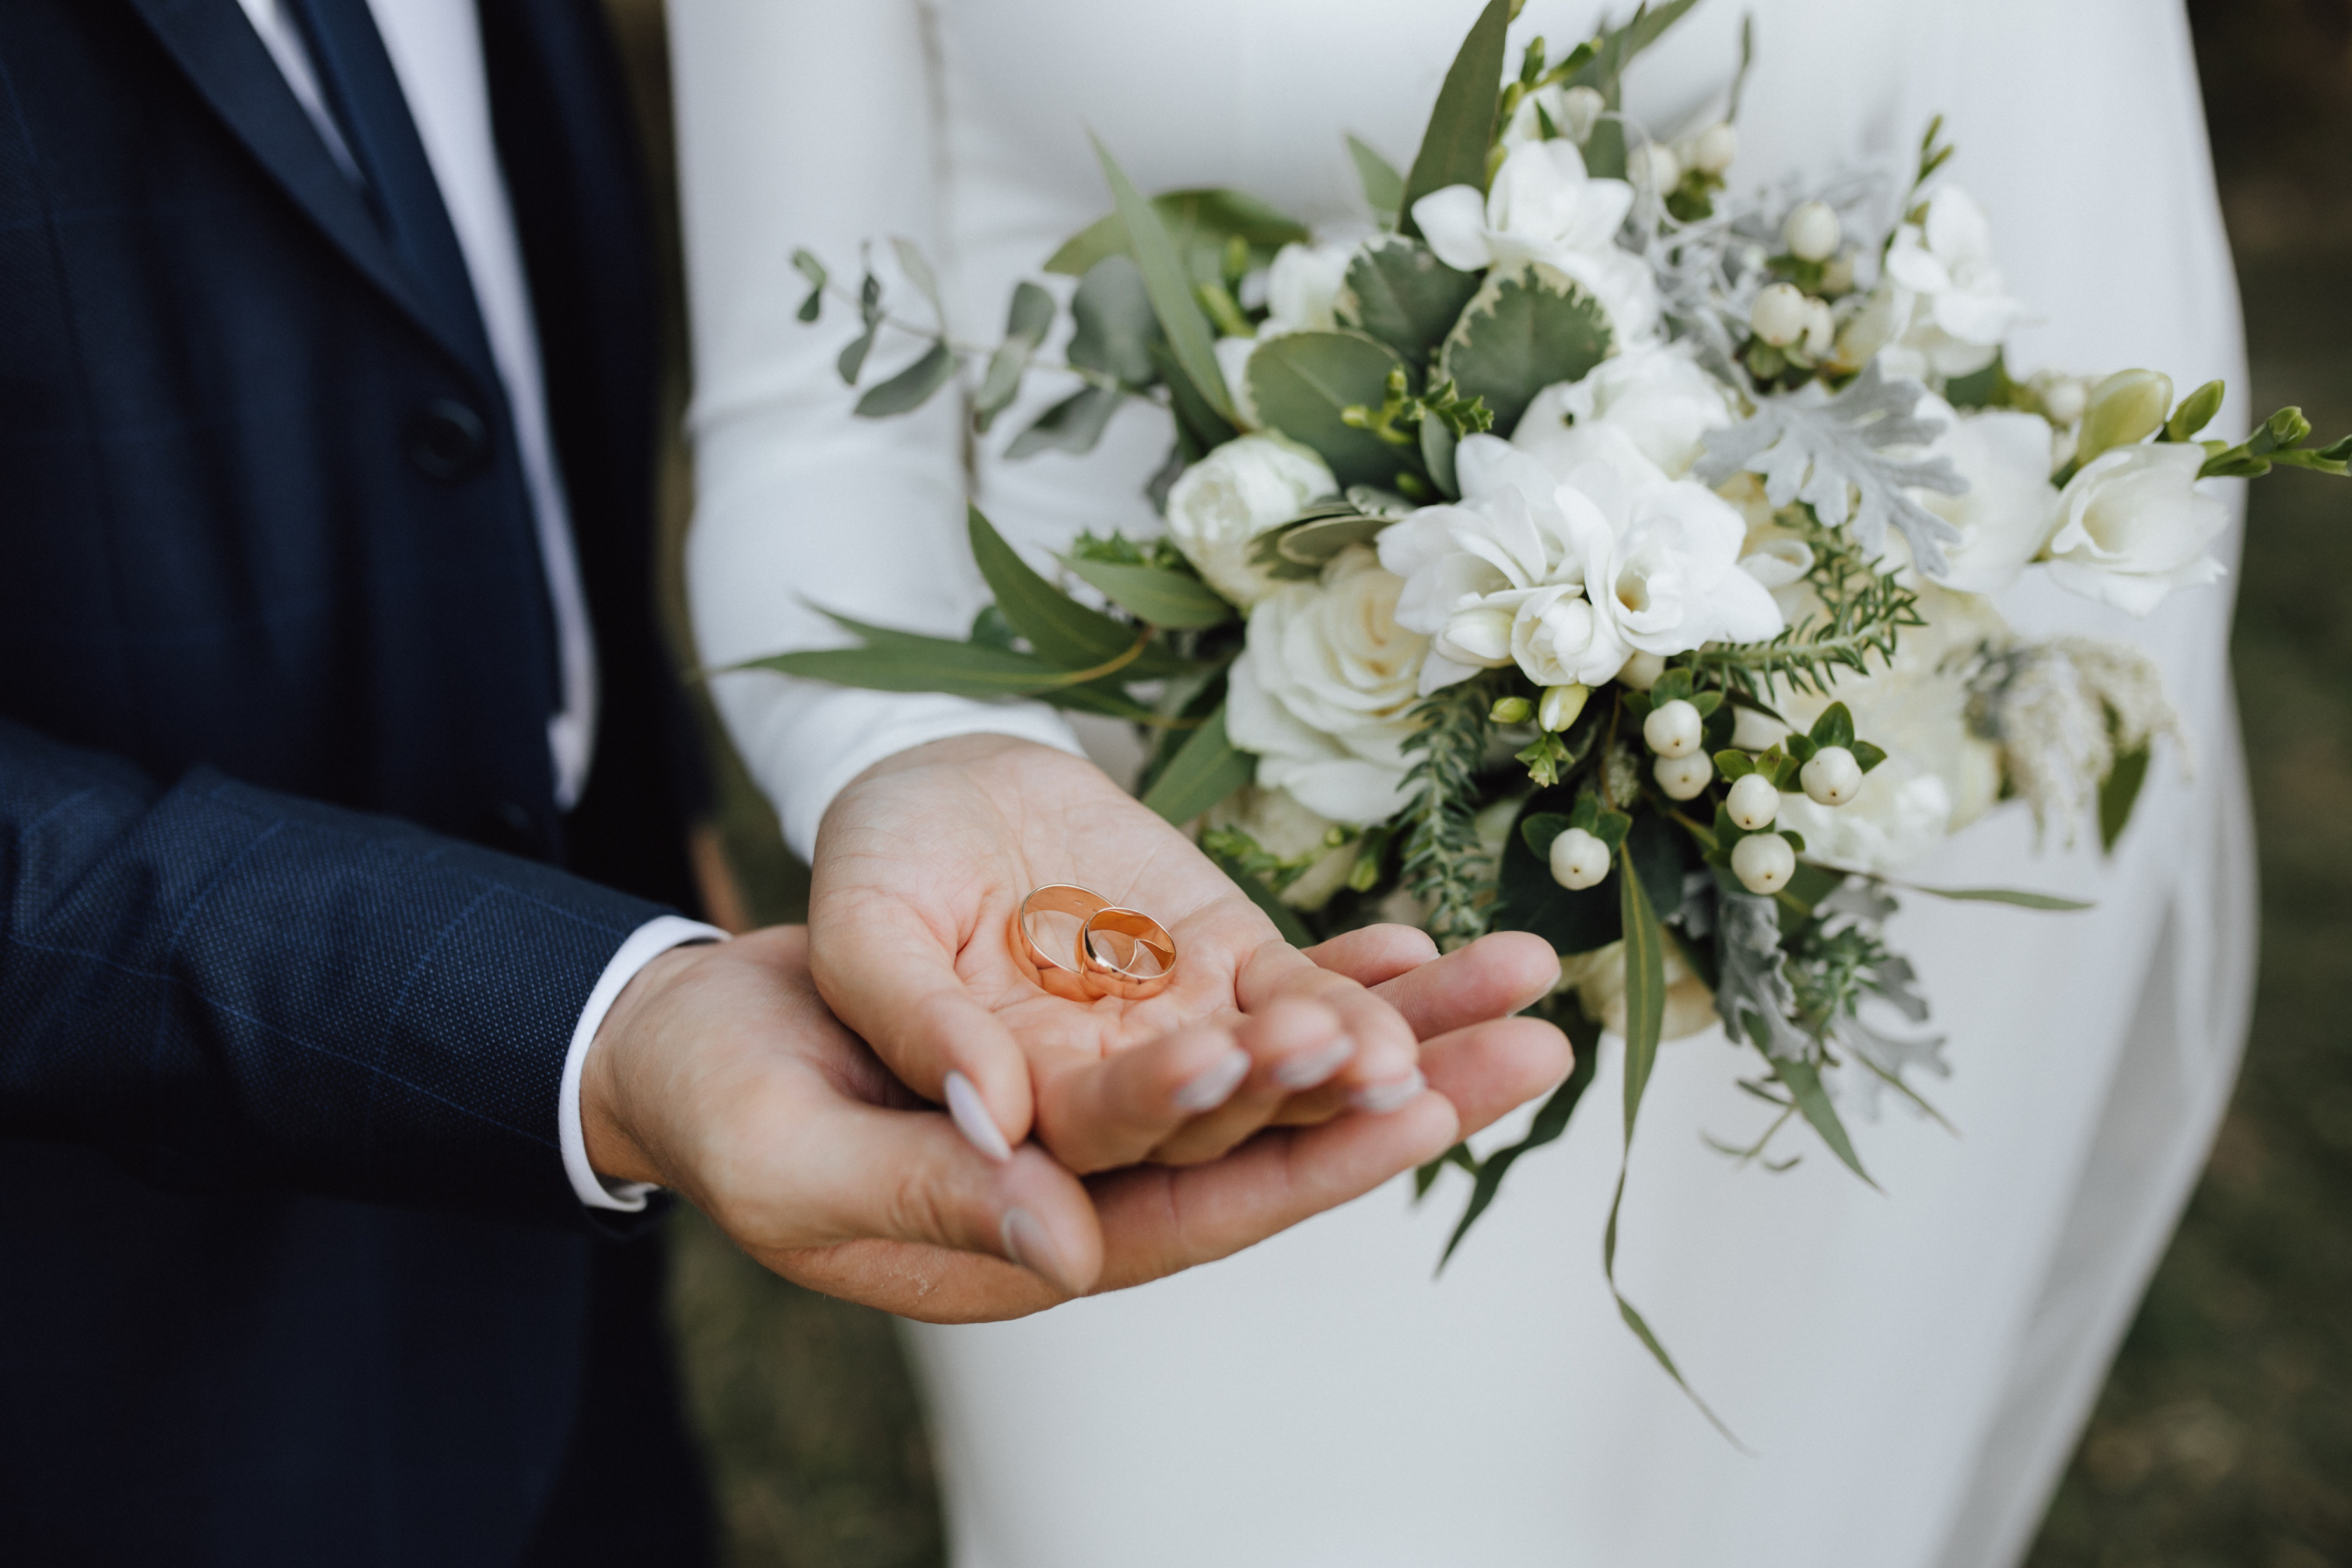 wedding-bands-in-the-hands-of-bride-and-groom-and-with-beautiful-wedding-bouquet-made-of-greenery-and-white-flowers.jpg